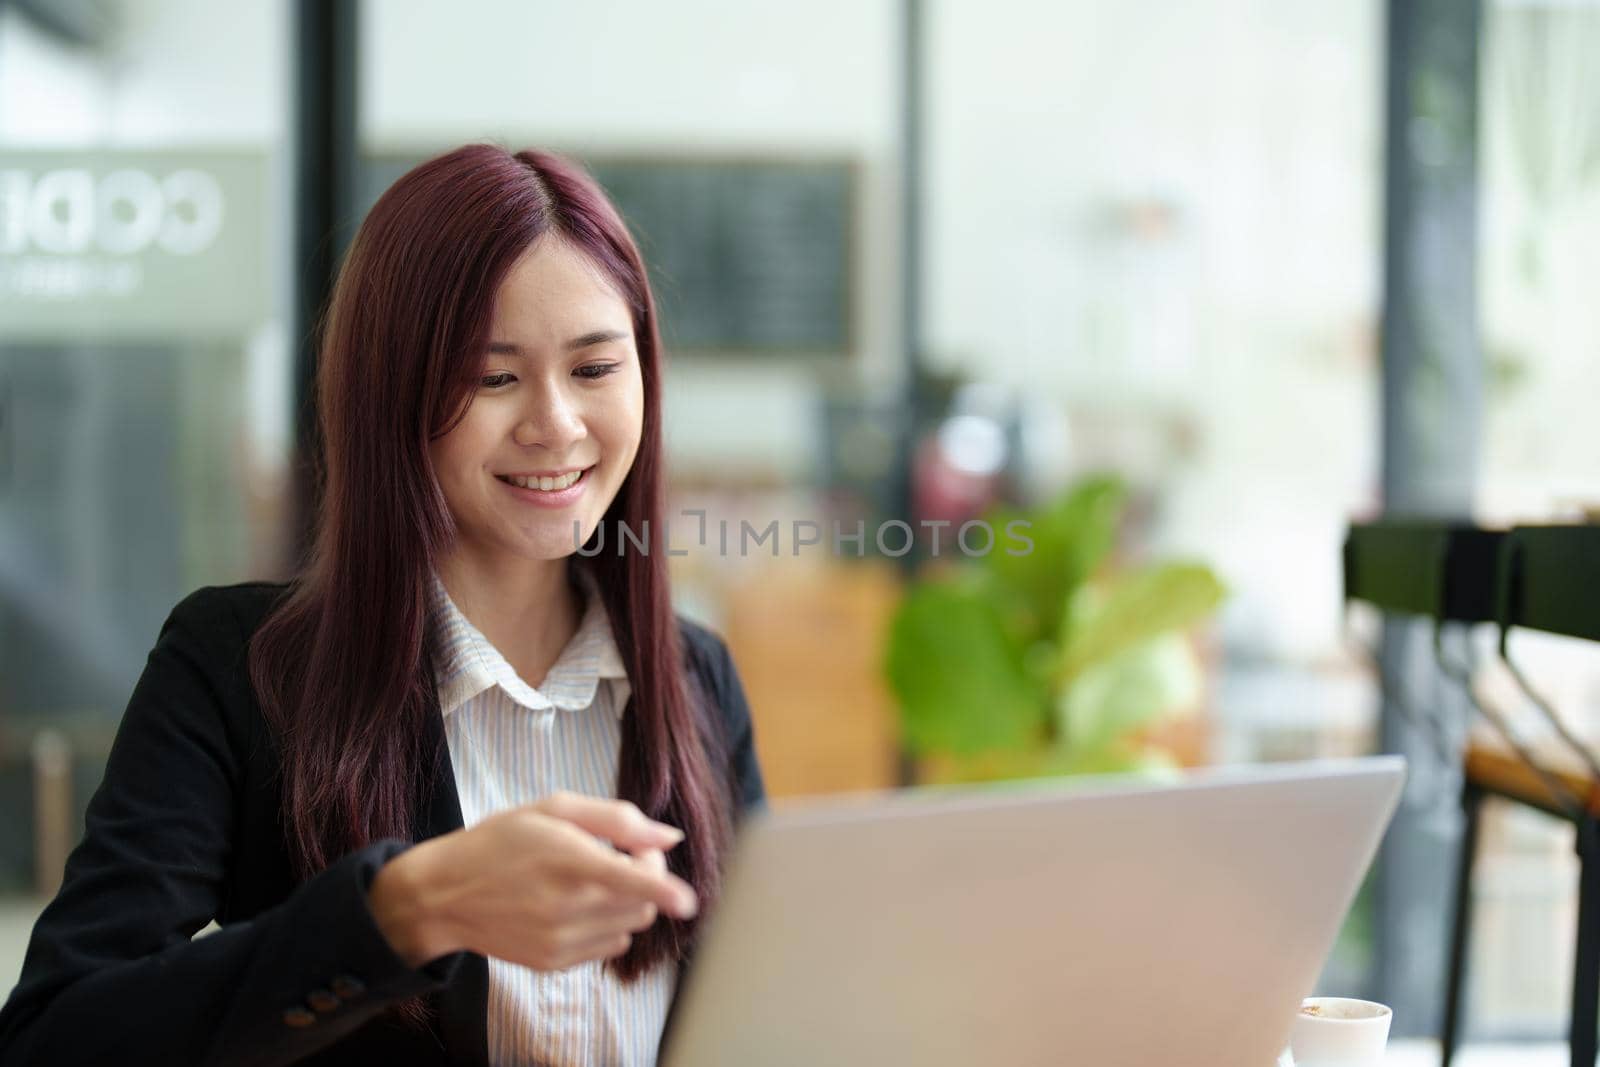 Portrait of a business woman using a computer to work on financial statements.